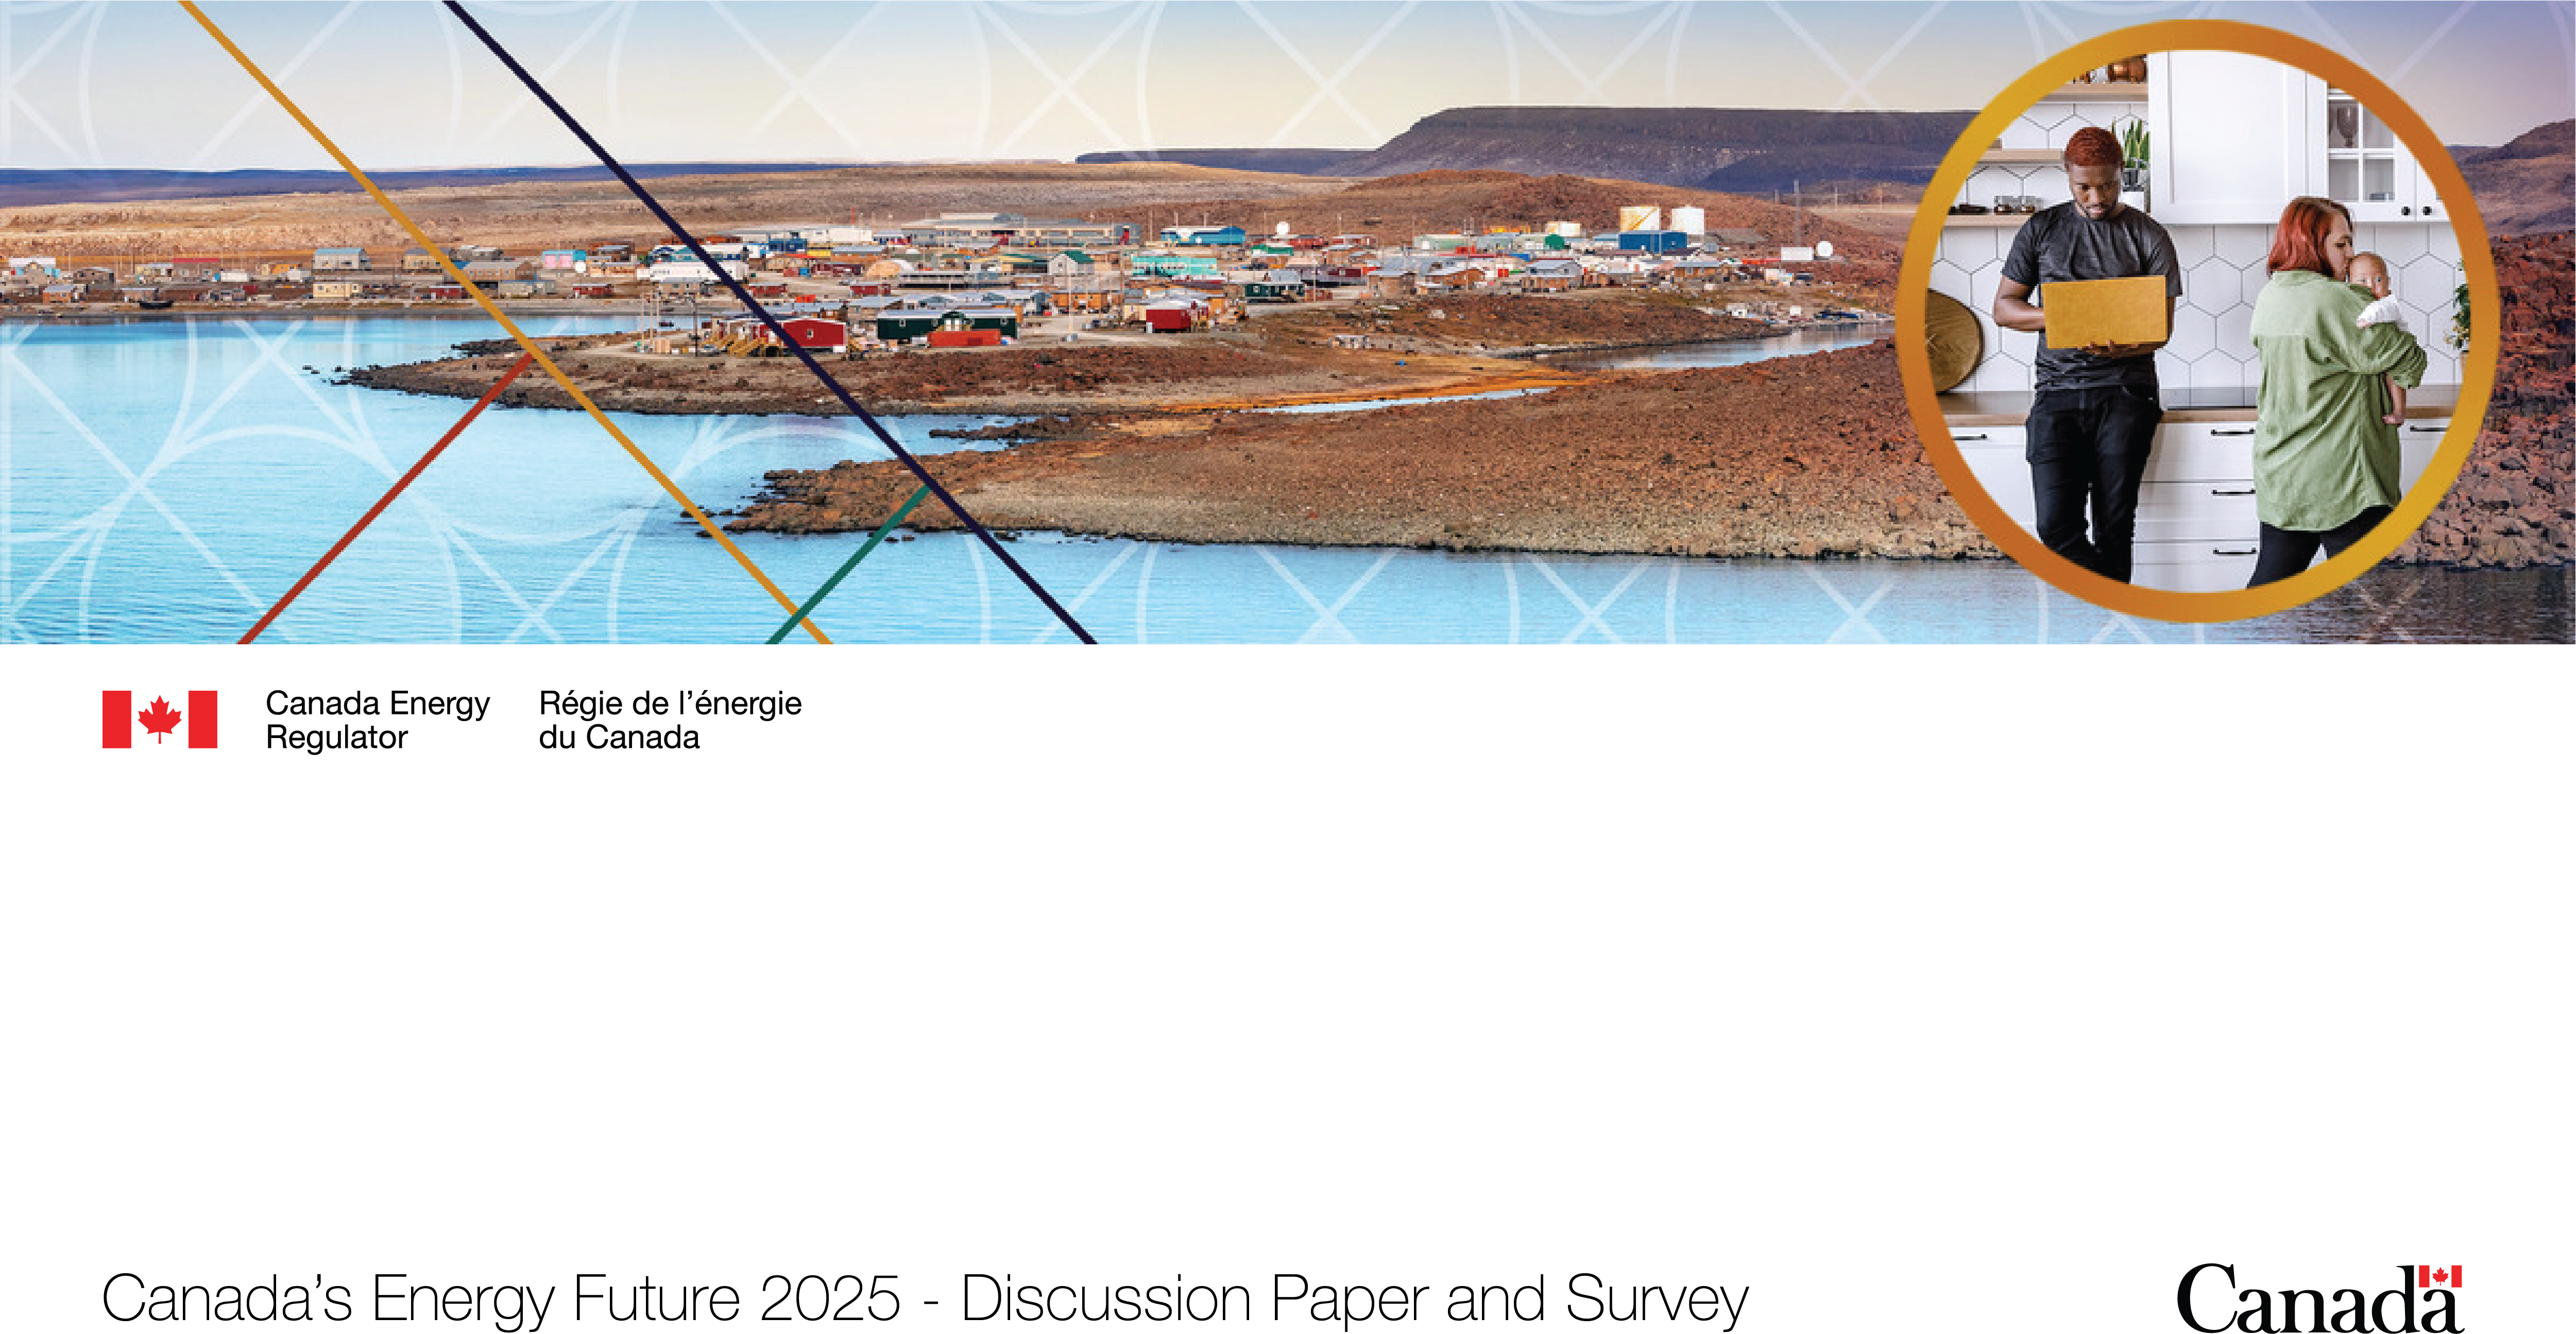 Canada’s Energy Future 2025 - Discussion Paper and Survey